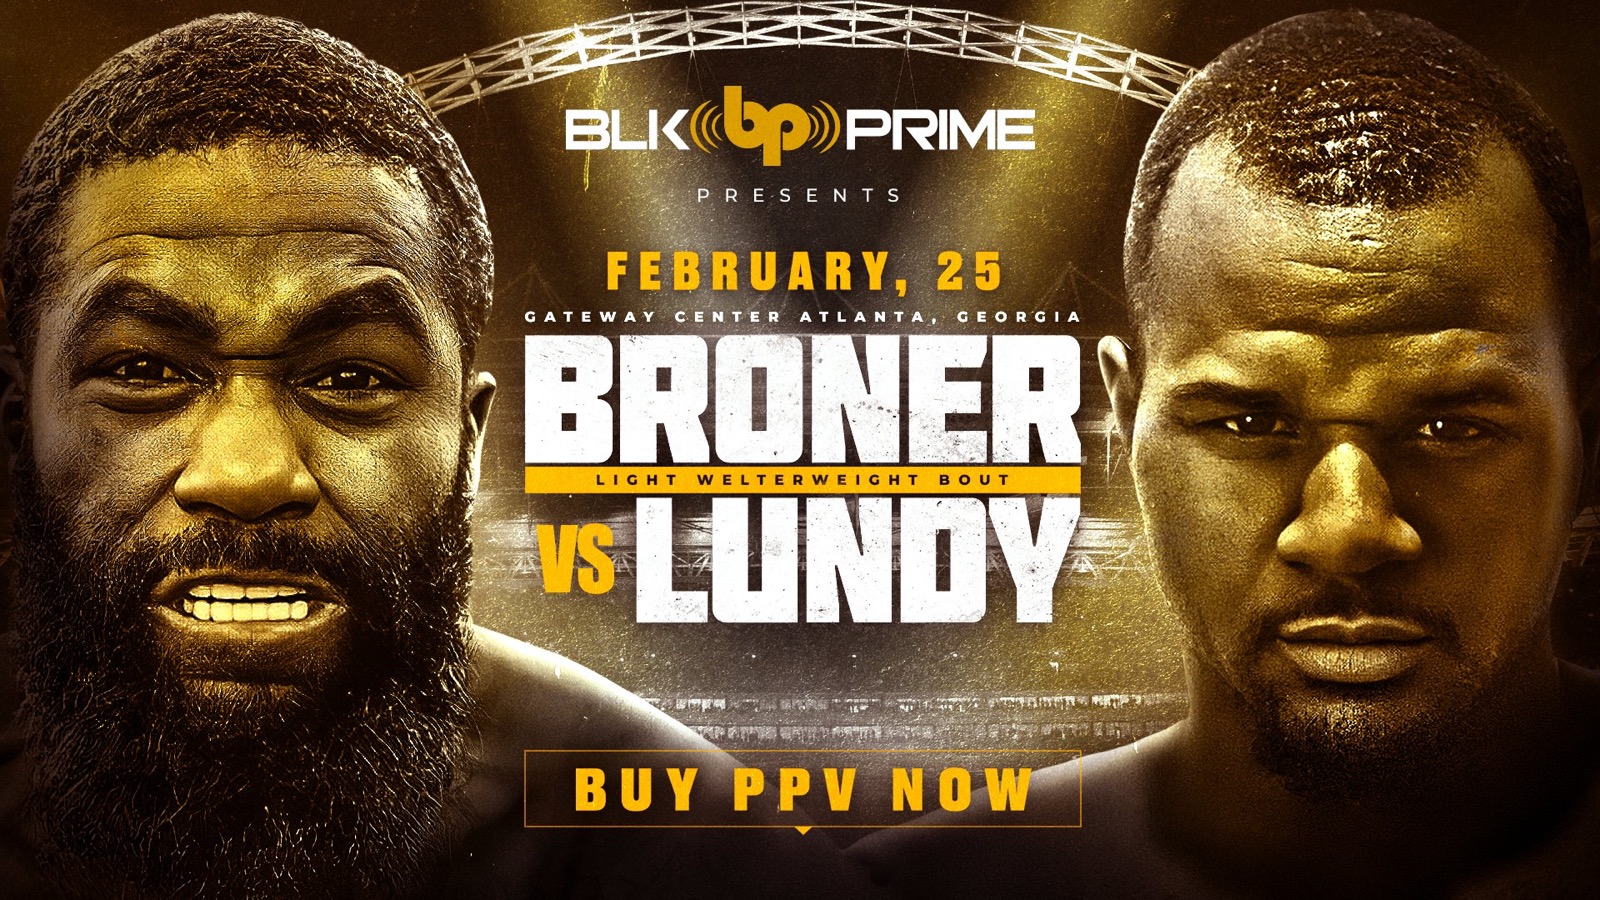 Regis Prograis predicts Broner beats Lundy by decision on Feb.25th